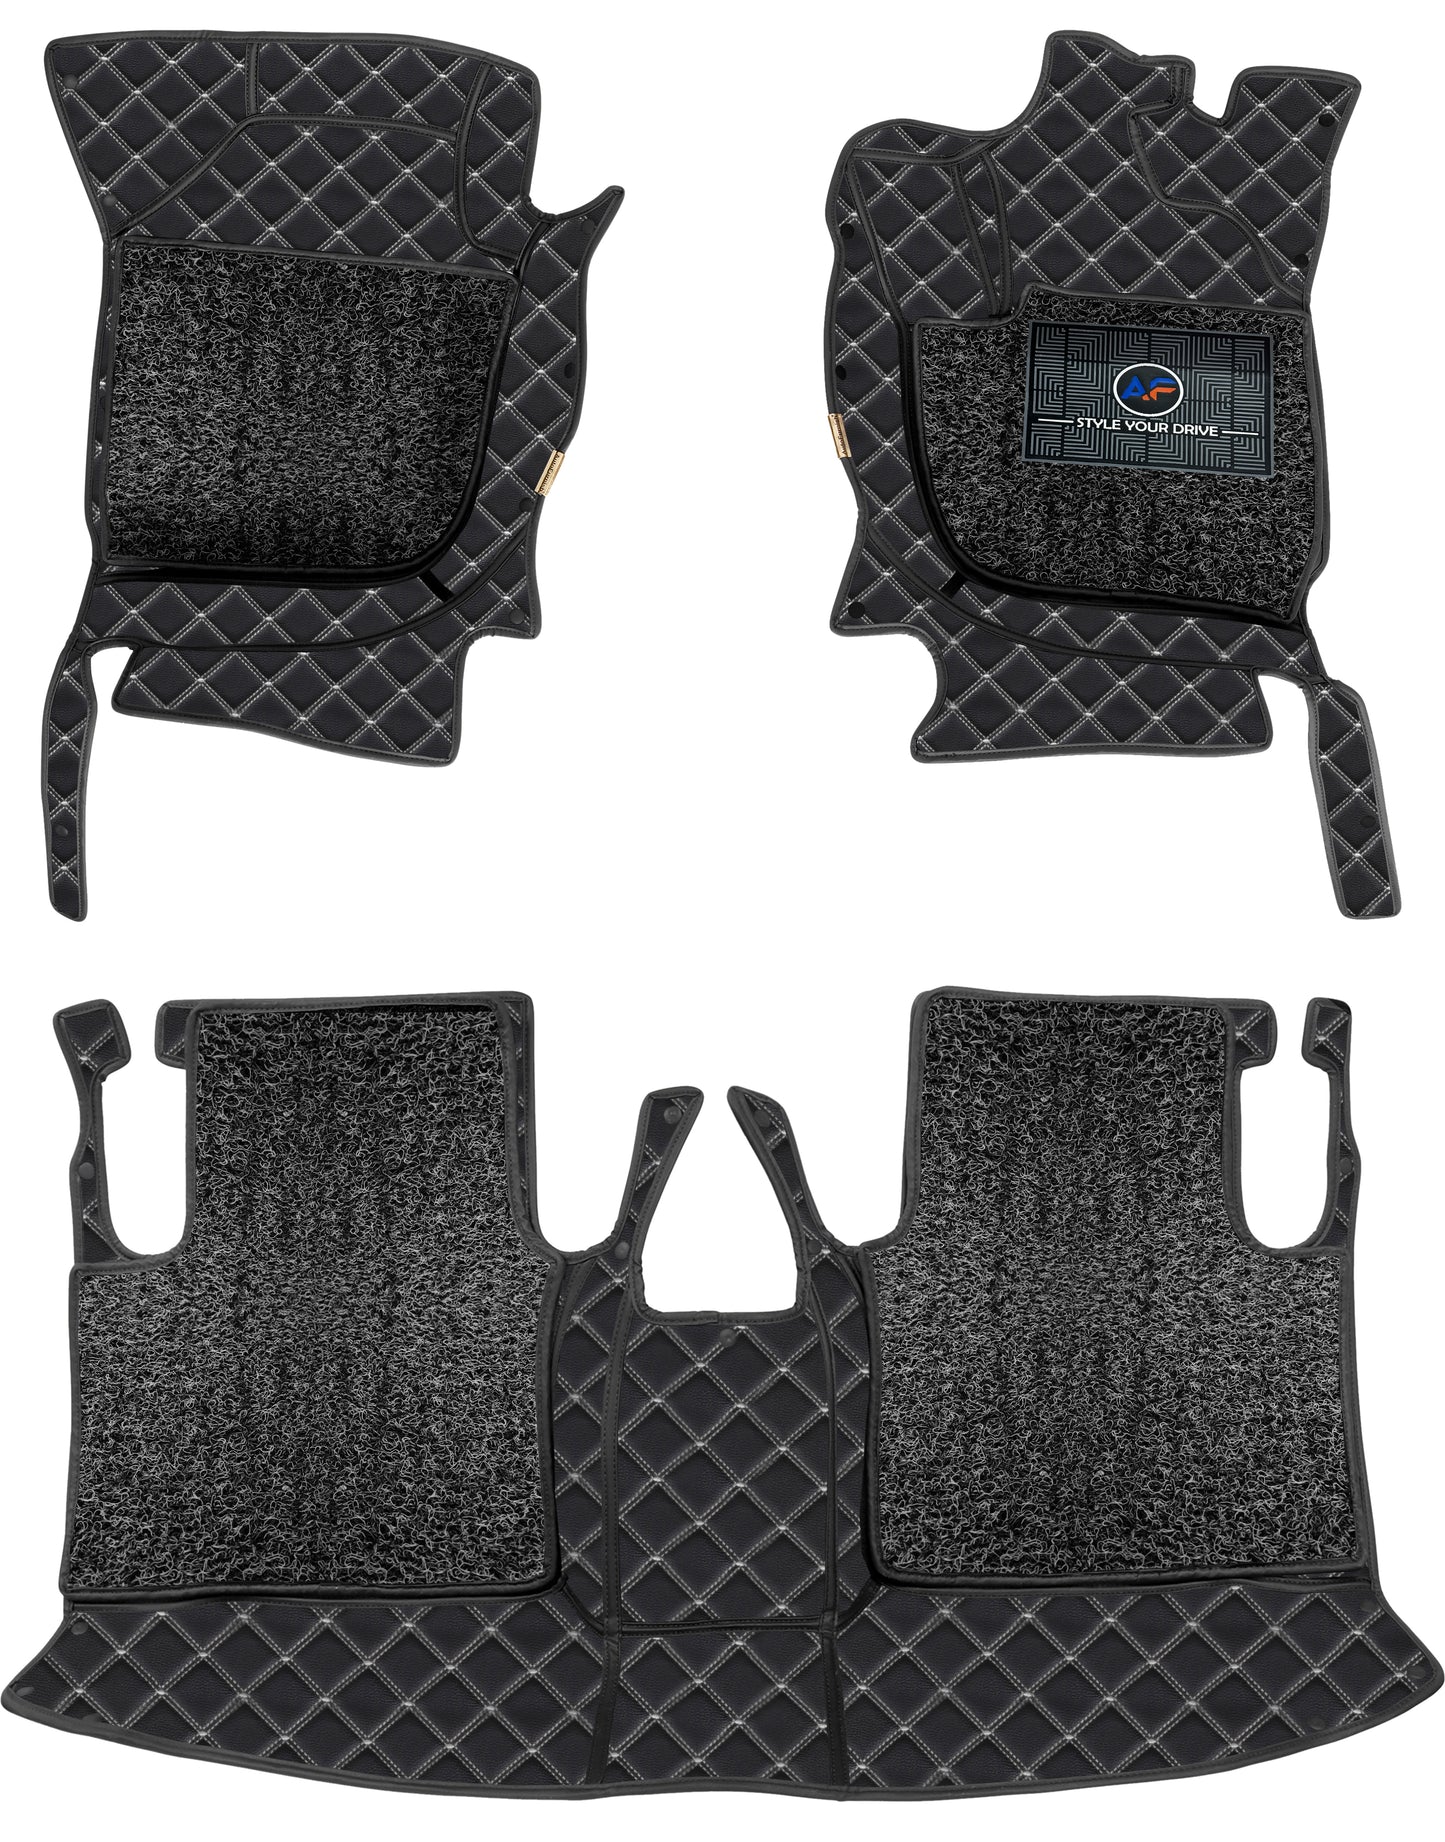 Mahindra XUV300 2019 7D Luxury Car Mat, All Weather Proof, Anti-Skid, 100% Waterproof & Odorless with Unique Diamond Fish Design (24mm Luxury PU Leather, 2 Rows)